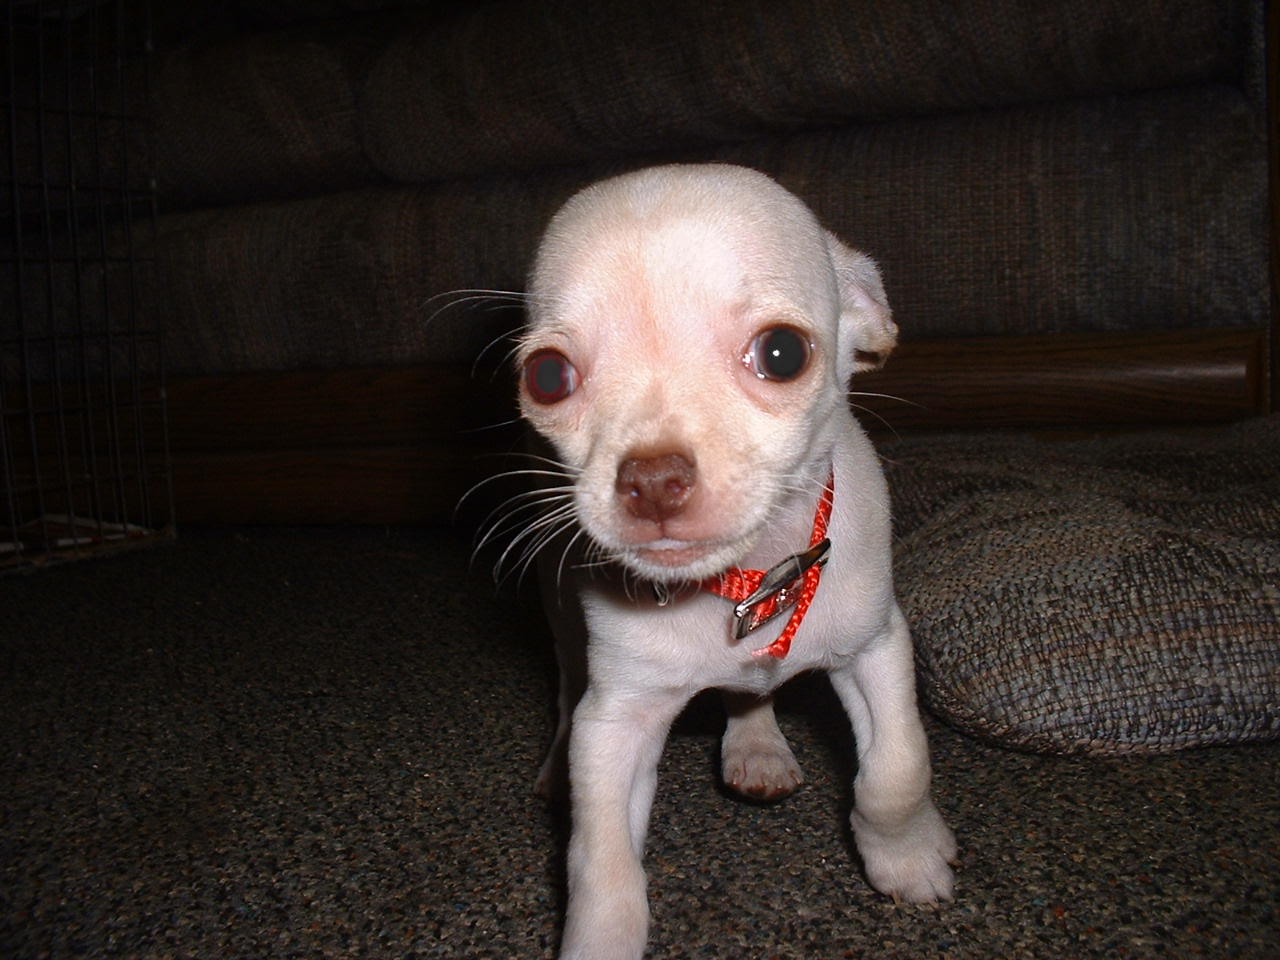 My cream colored baby boy Chihuahua we call Little Rink